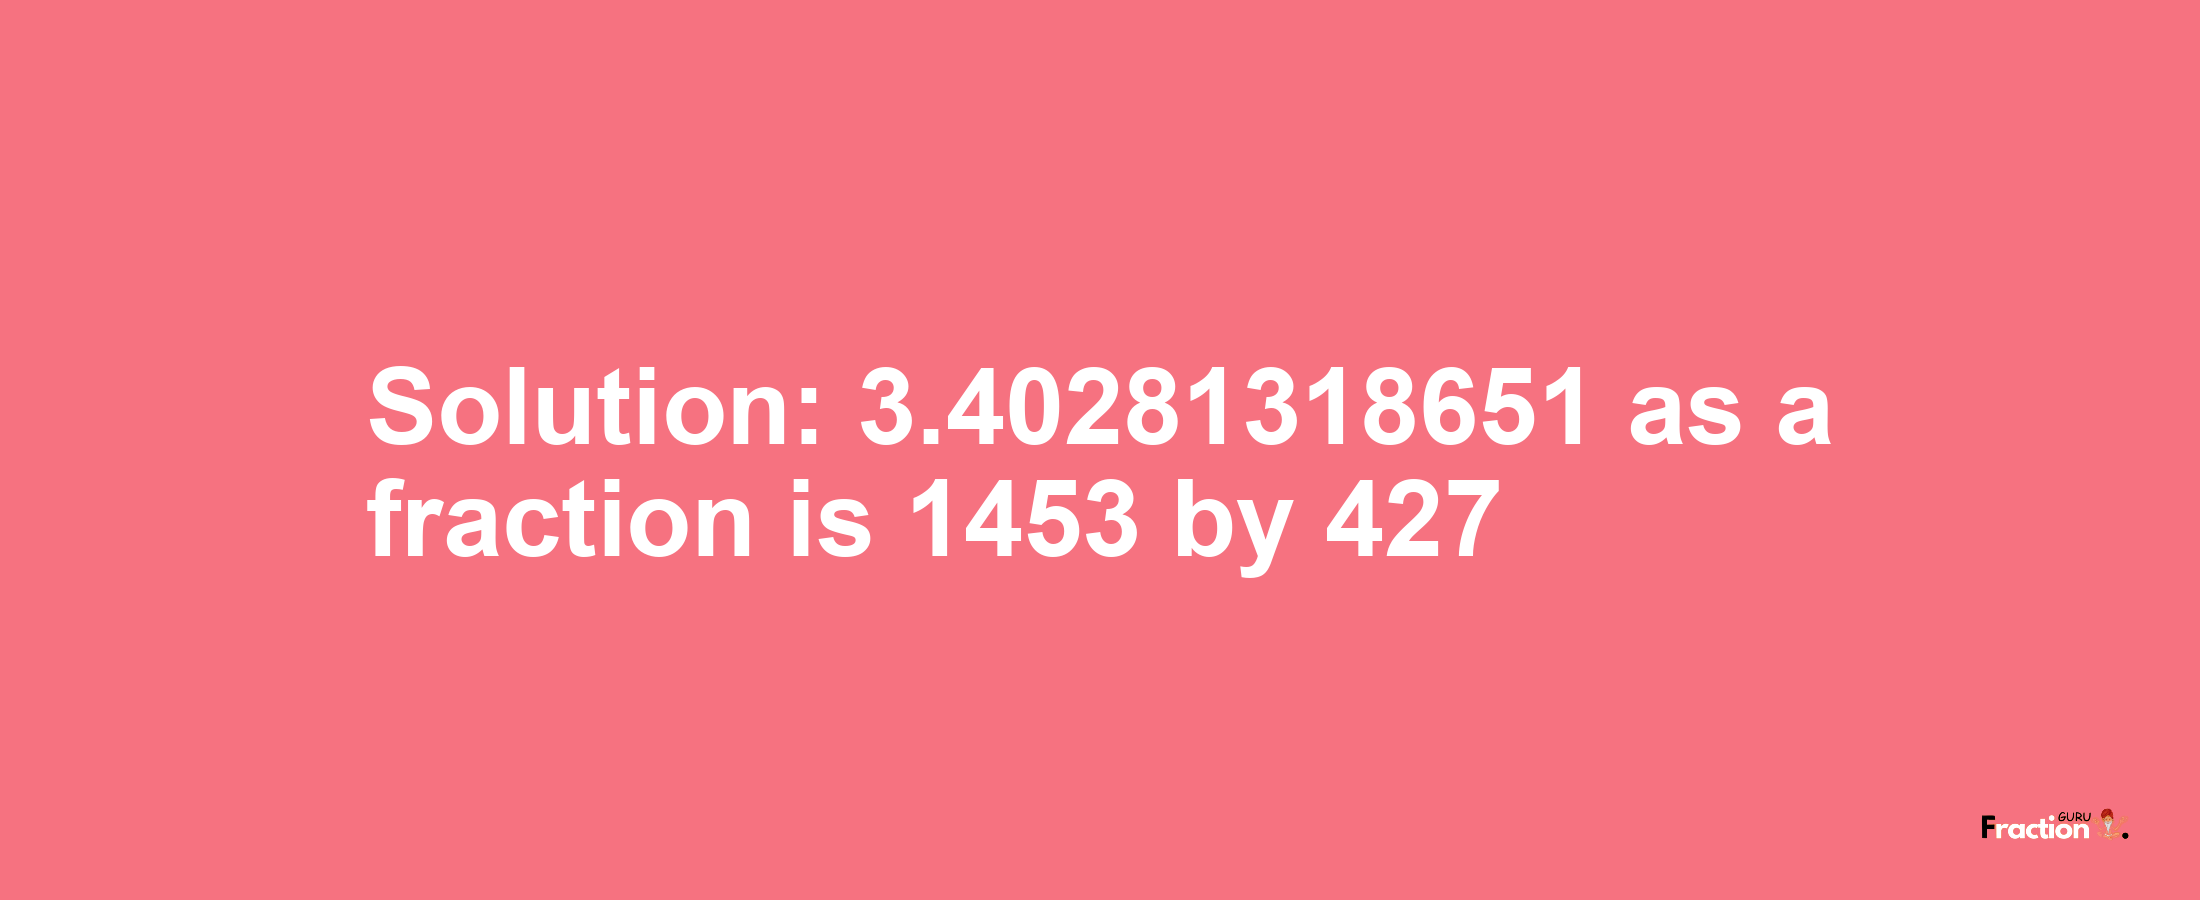 Solution:3.40281318651 as a fraction is 1453/427